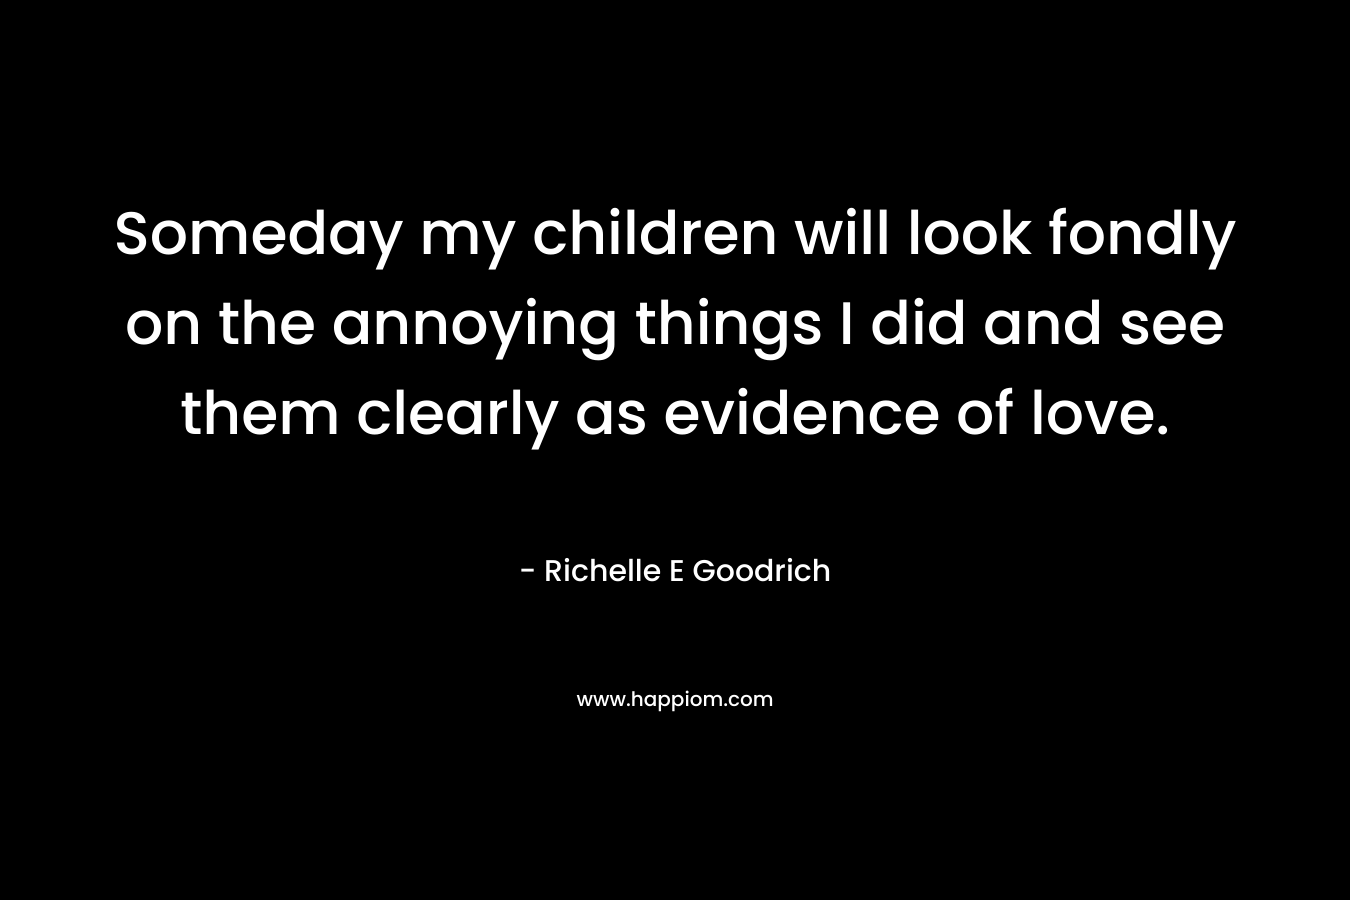 Someday my children will look fondly on the annoying things I did and see them clearly as evidence of love.